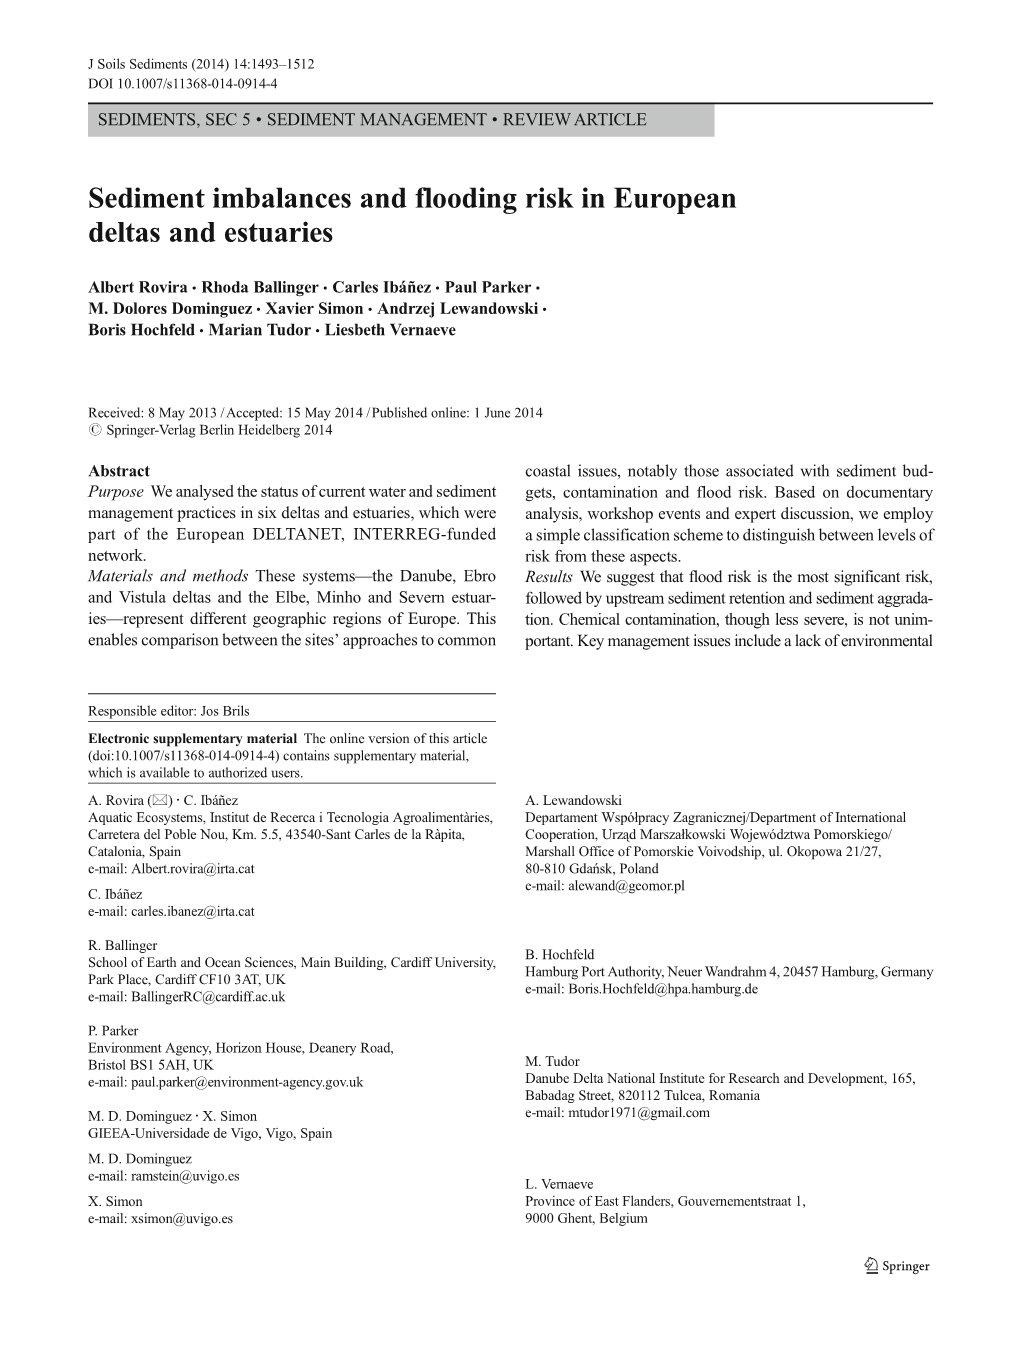 Sediment Imbalances and Flooding Risk in European Deltas and Estuaries